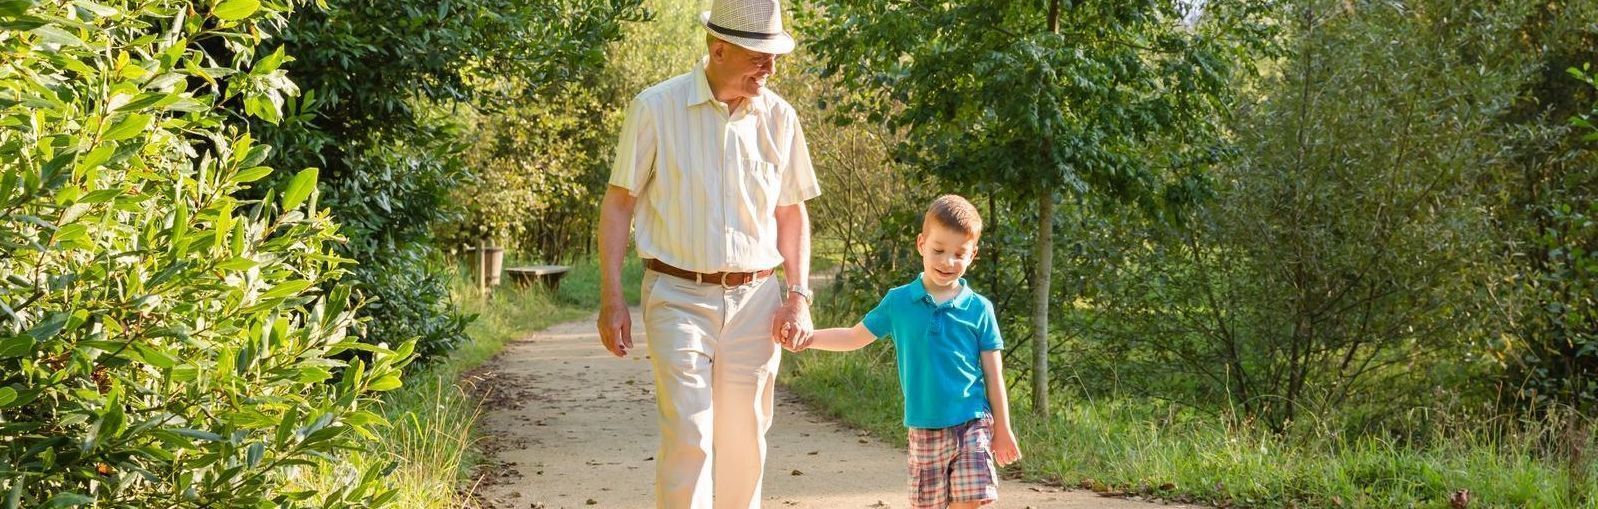 Grandfather and boy walking